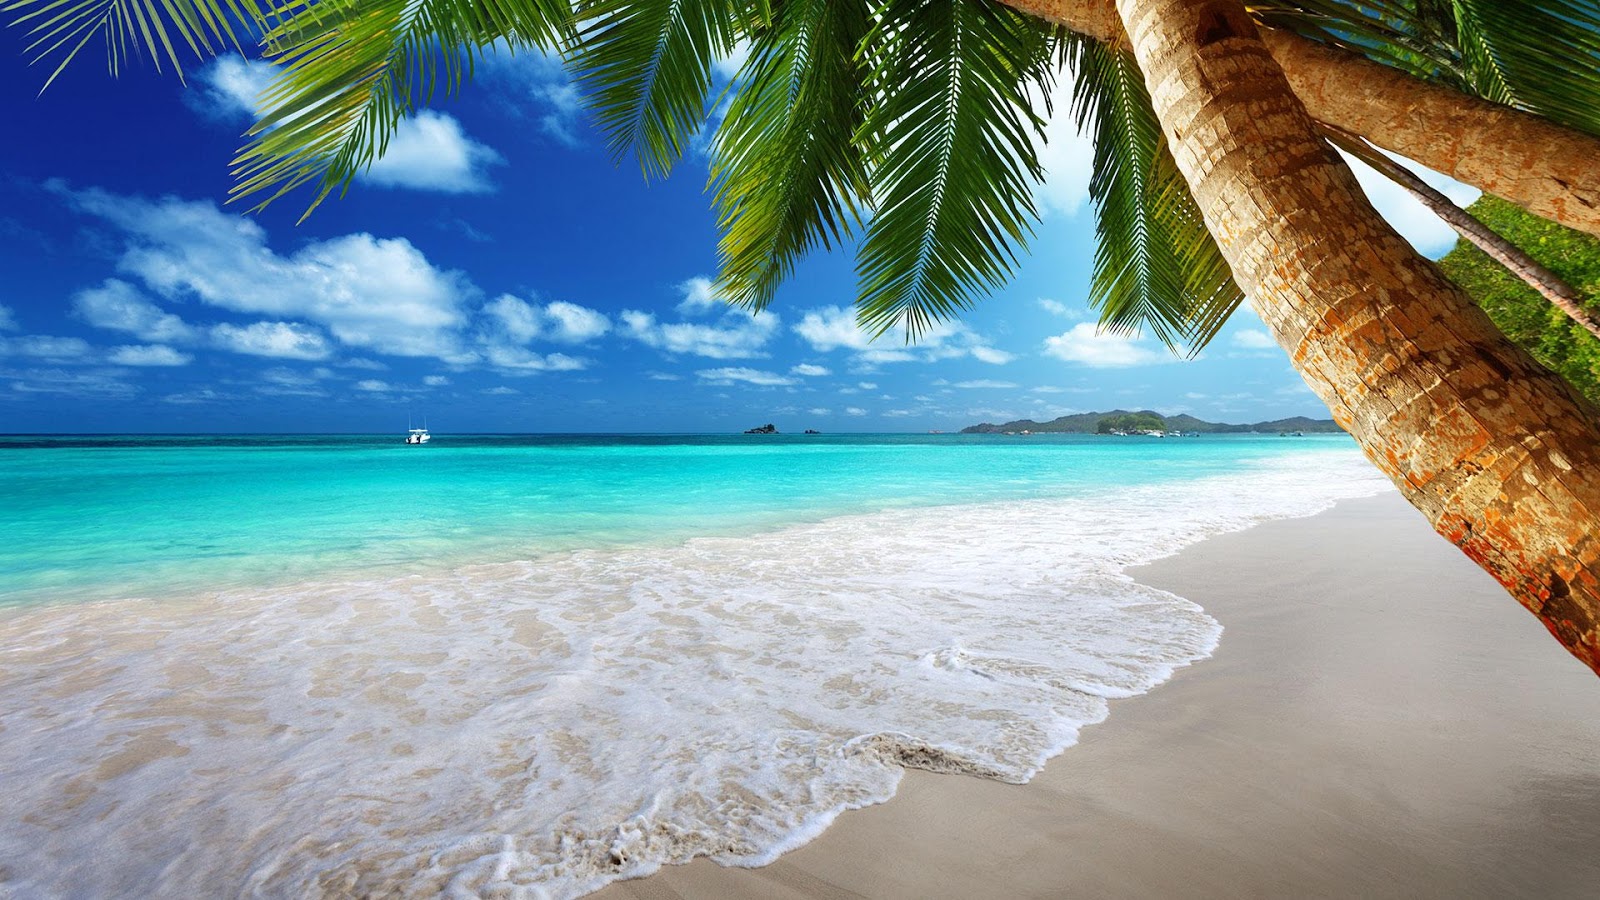  beach images and exotic holiday destinations here is the new beach 1600x900